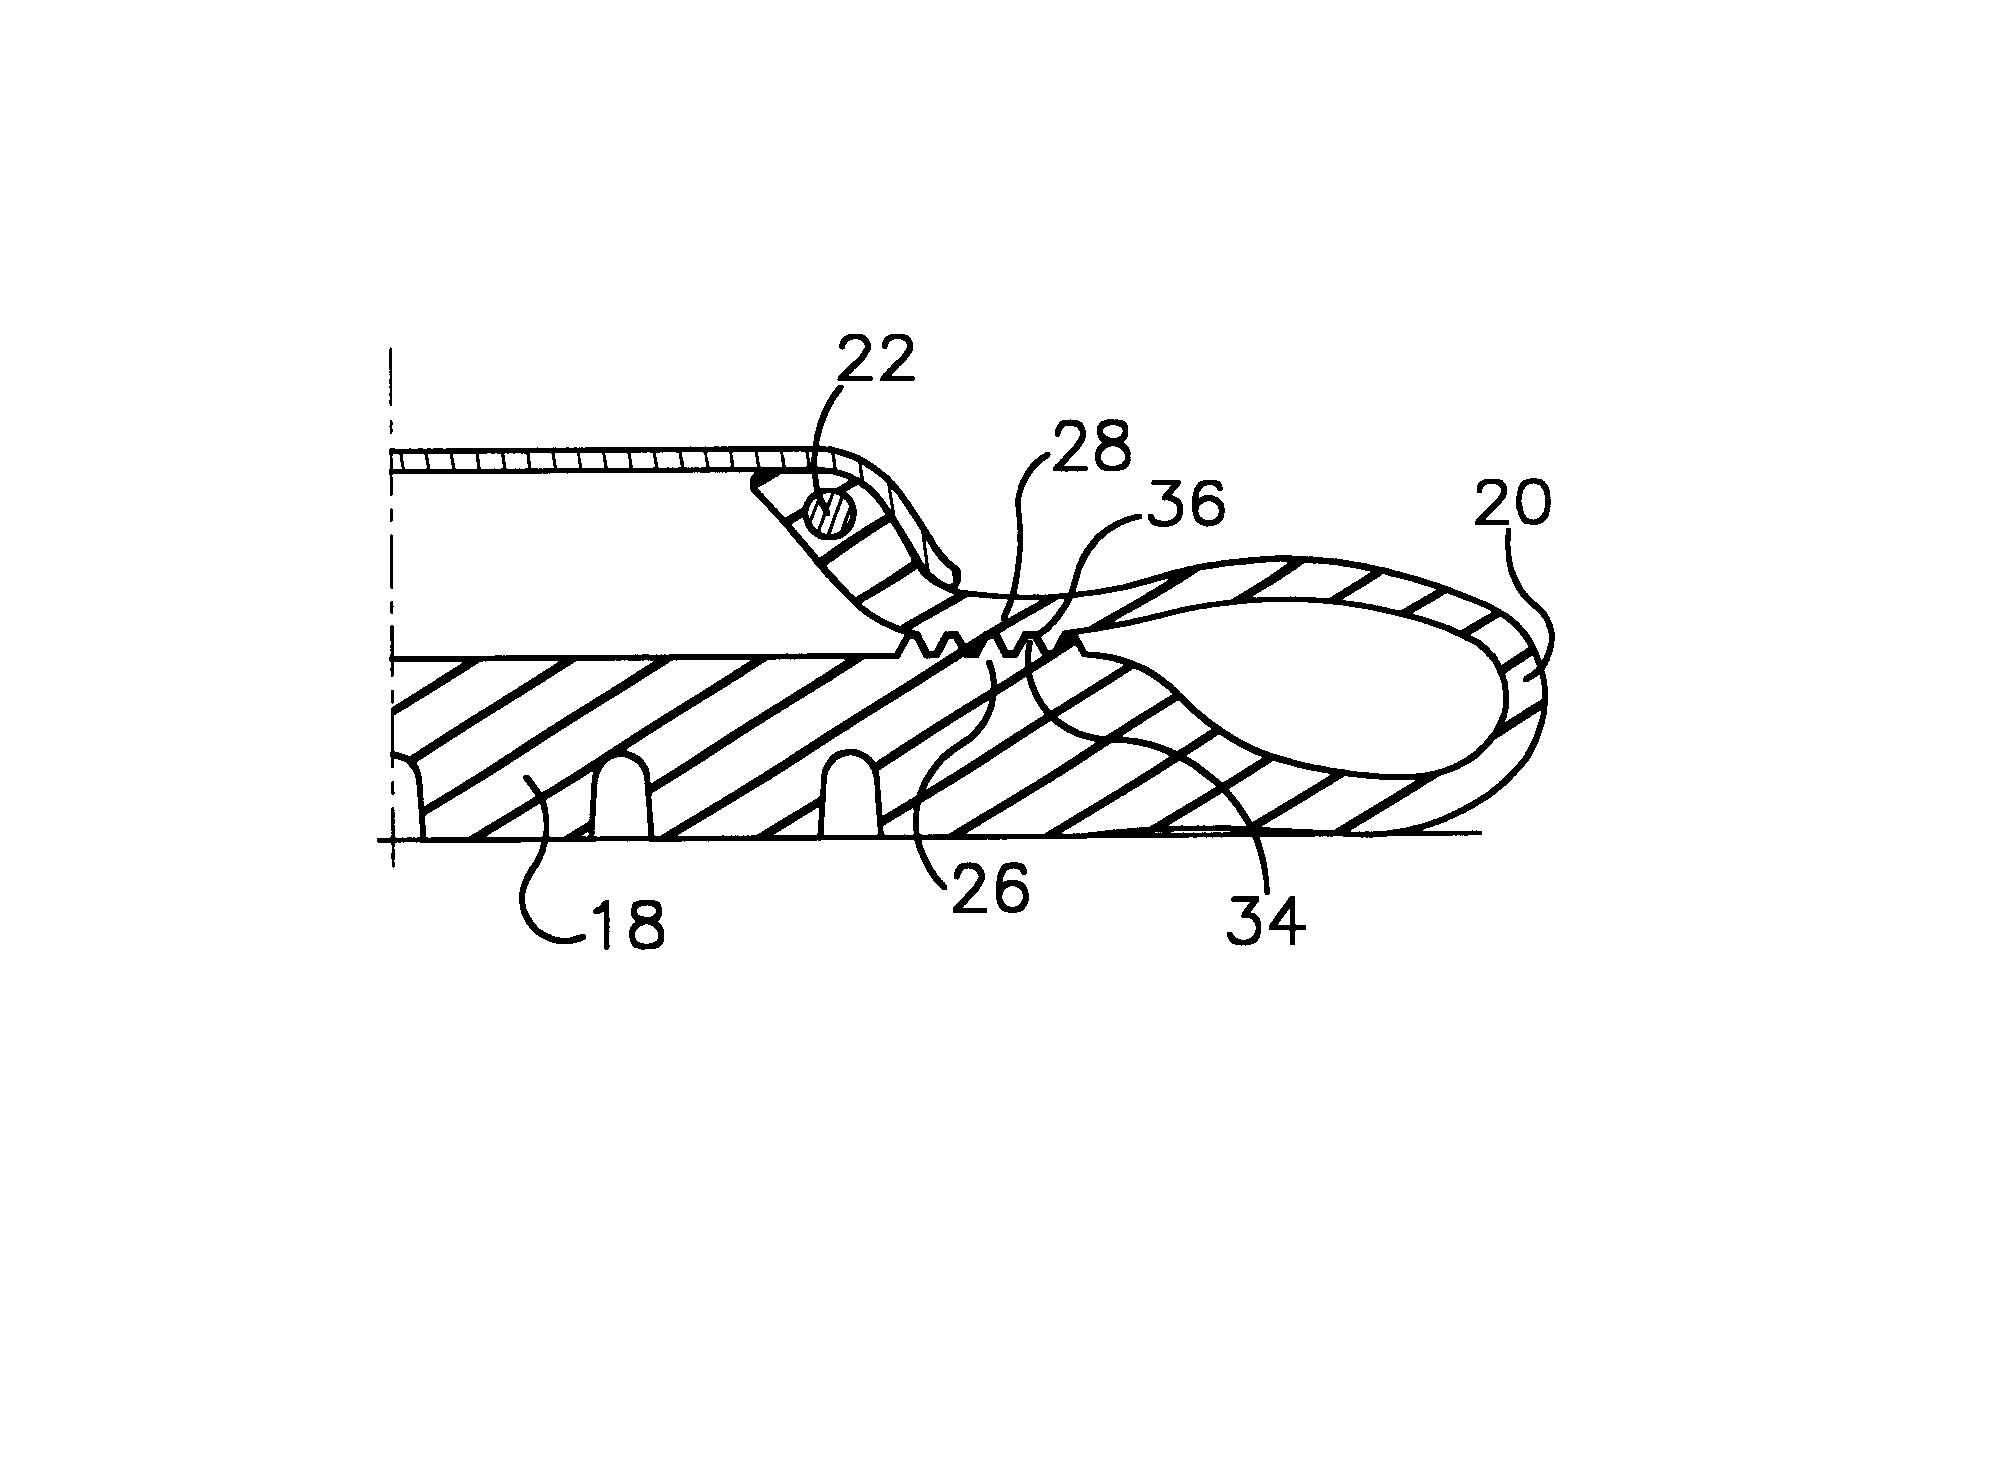 Pneumatic tire having a stabilizing system for under-inflated conditions